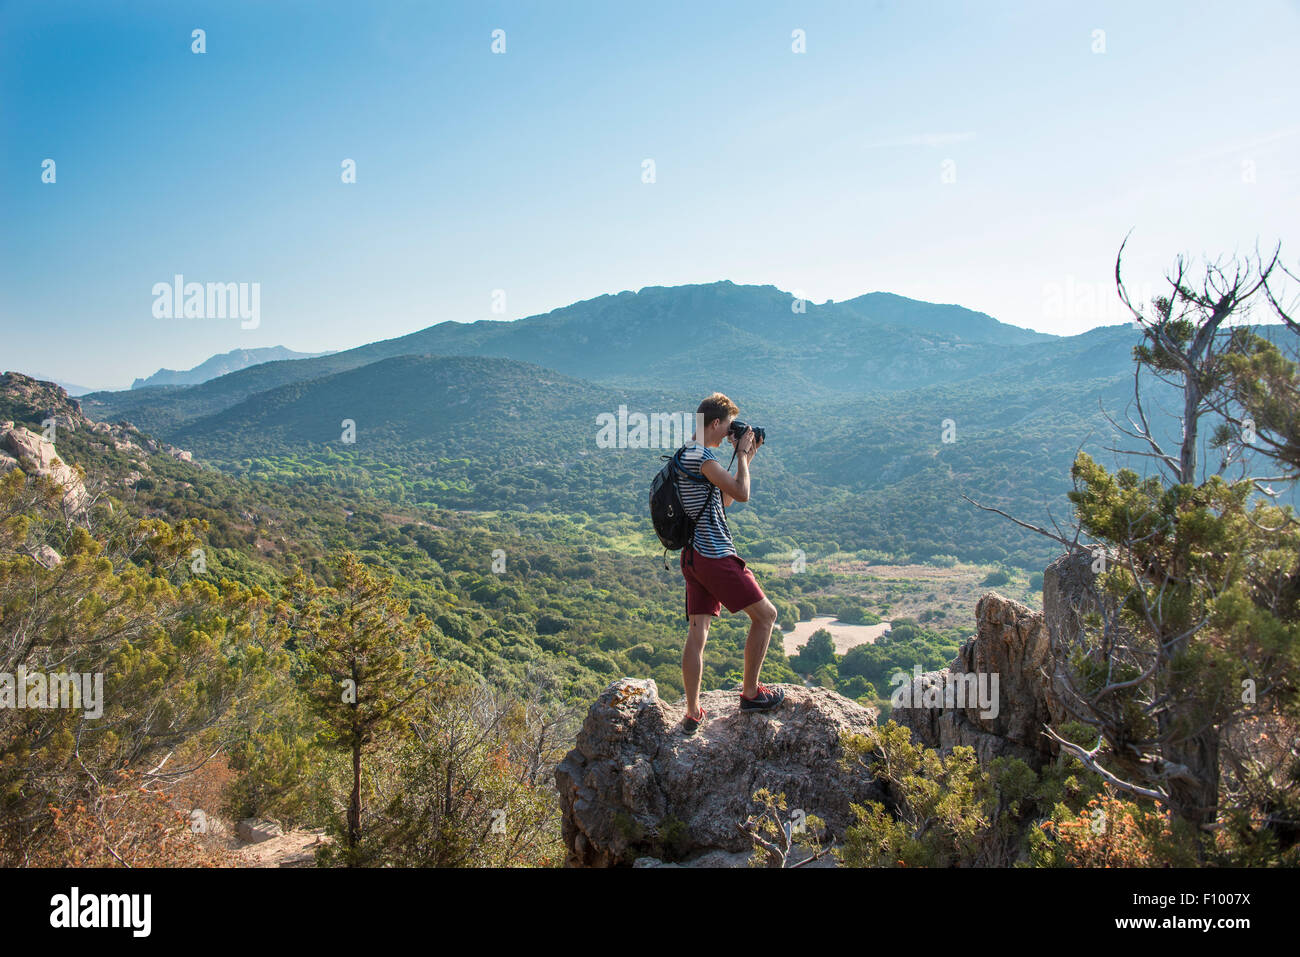 Young man doing landscape photography of the mountainous views in Sartene, Corsica, France Stock Photo